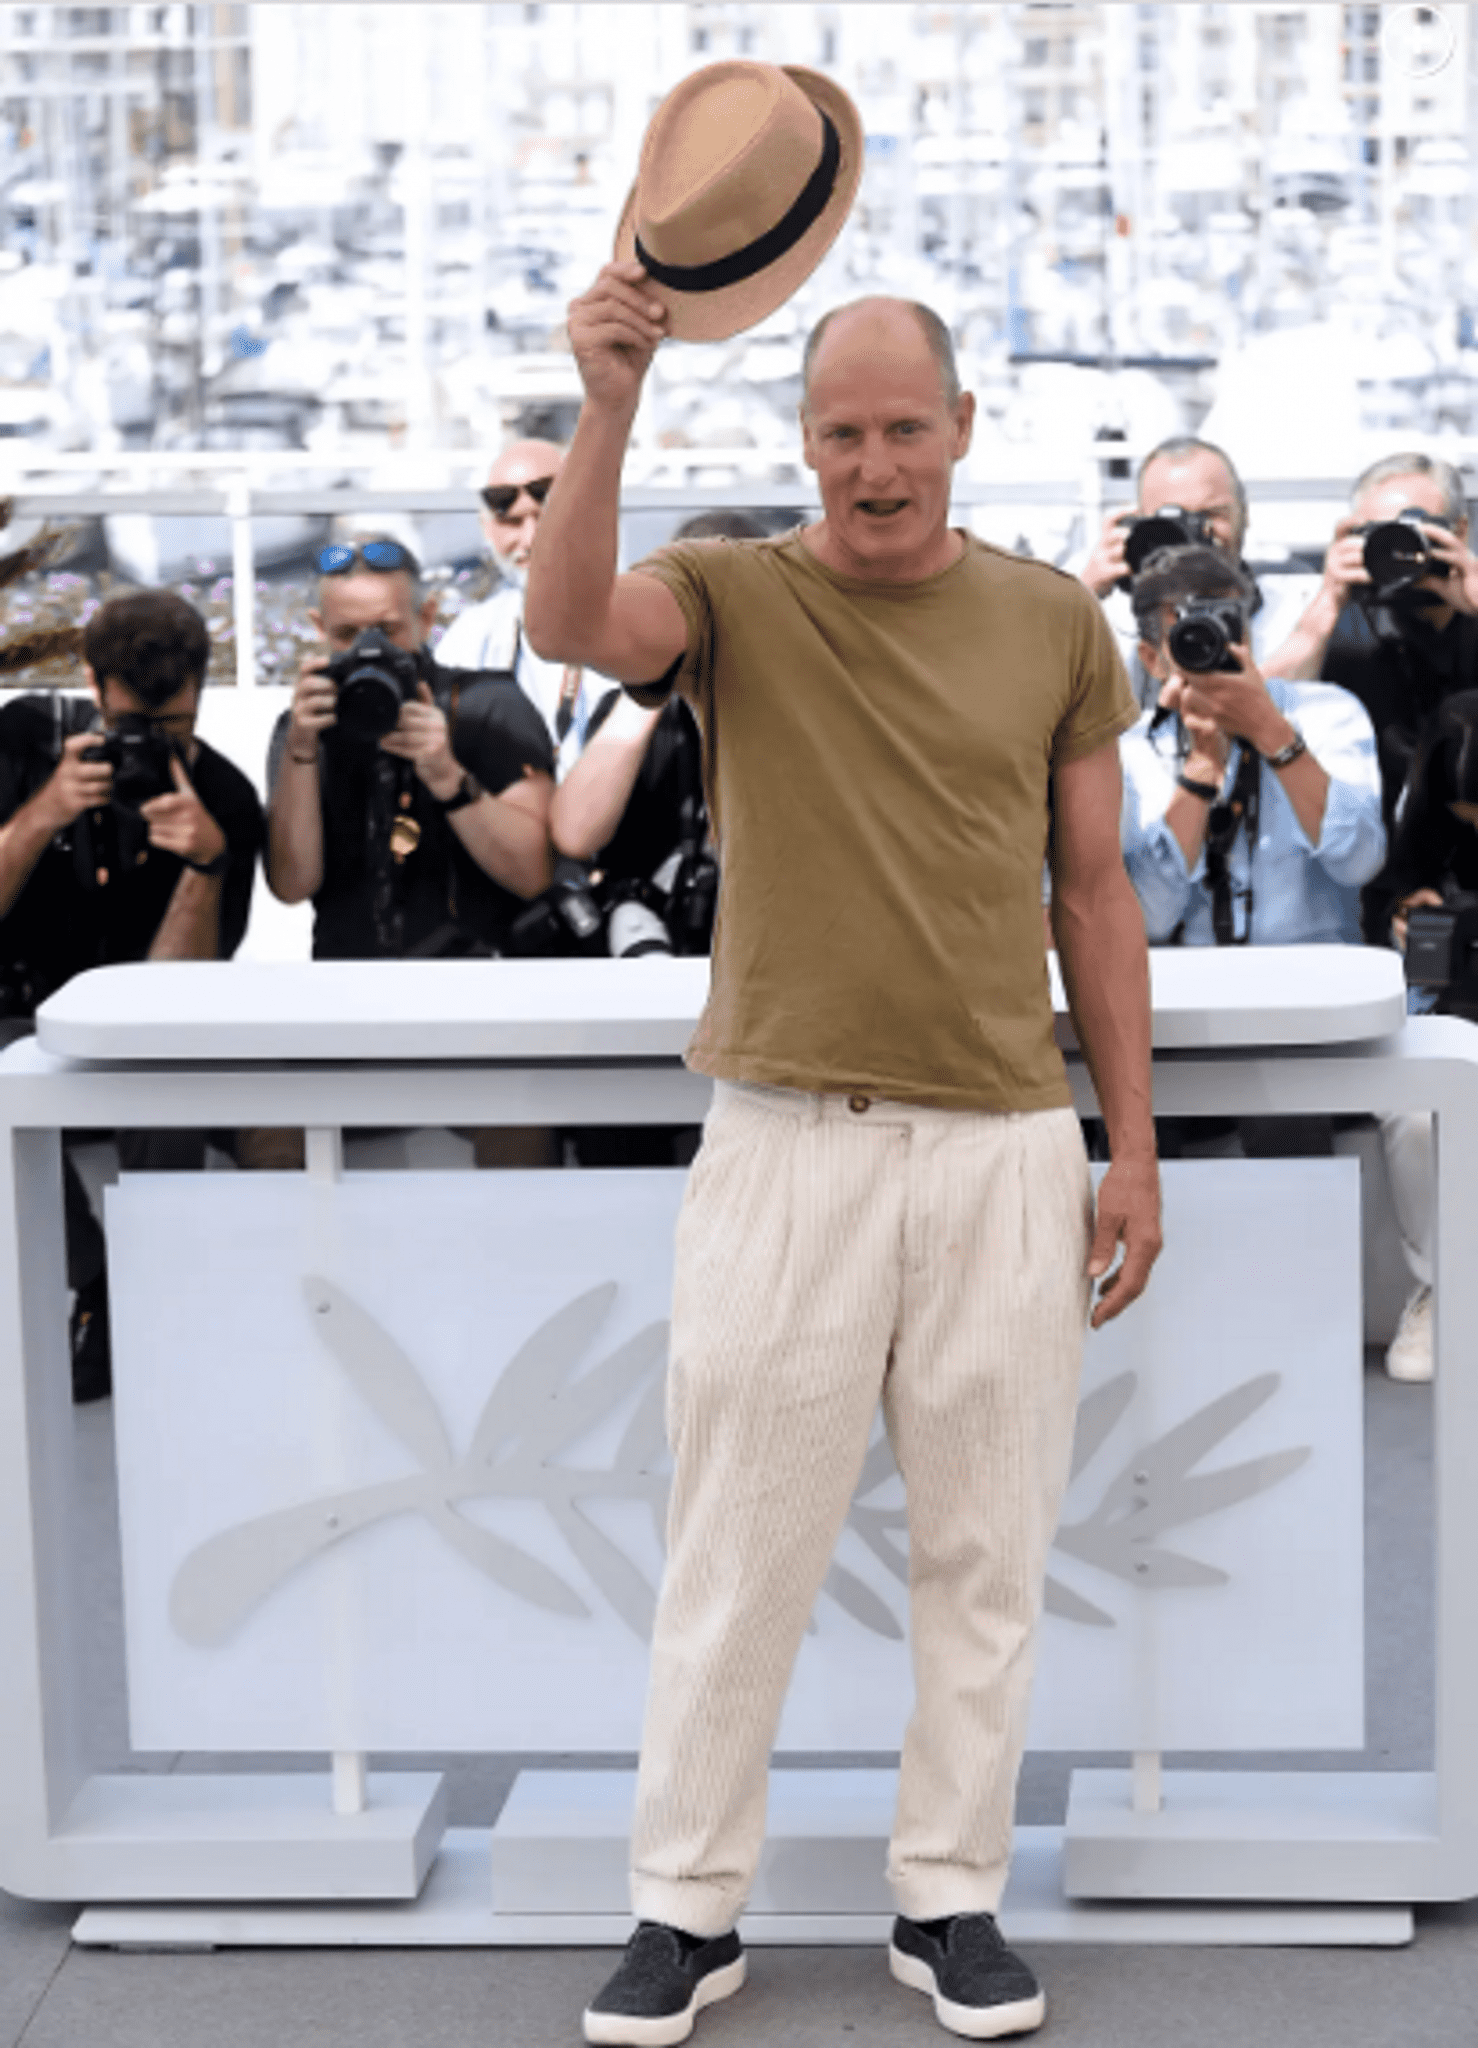 Woody Harrelson's film gets an eight-minute standing ovation at Cannes